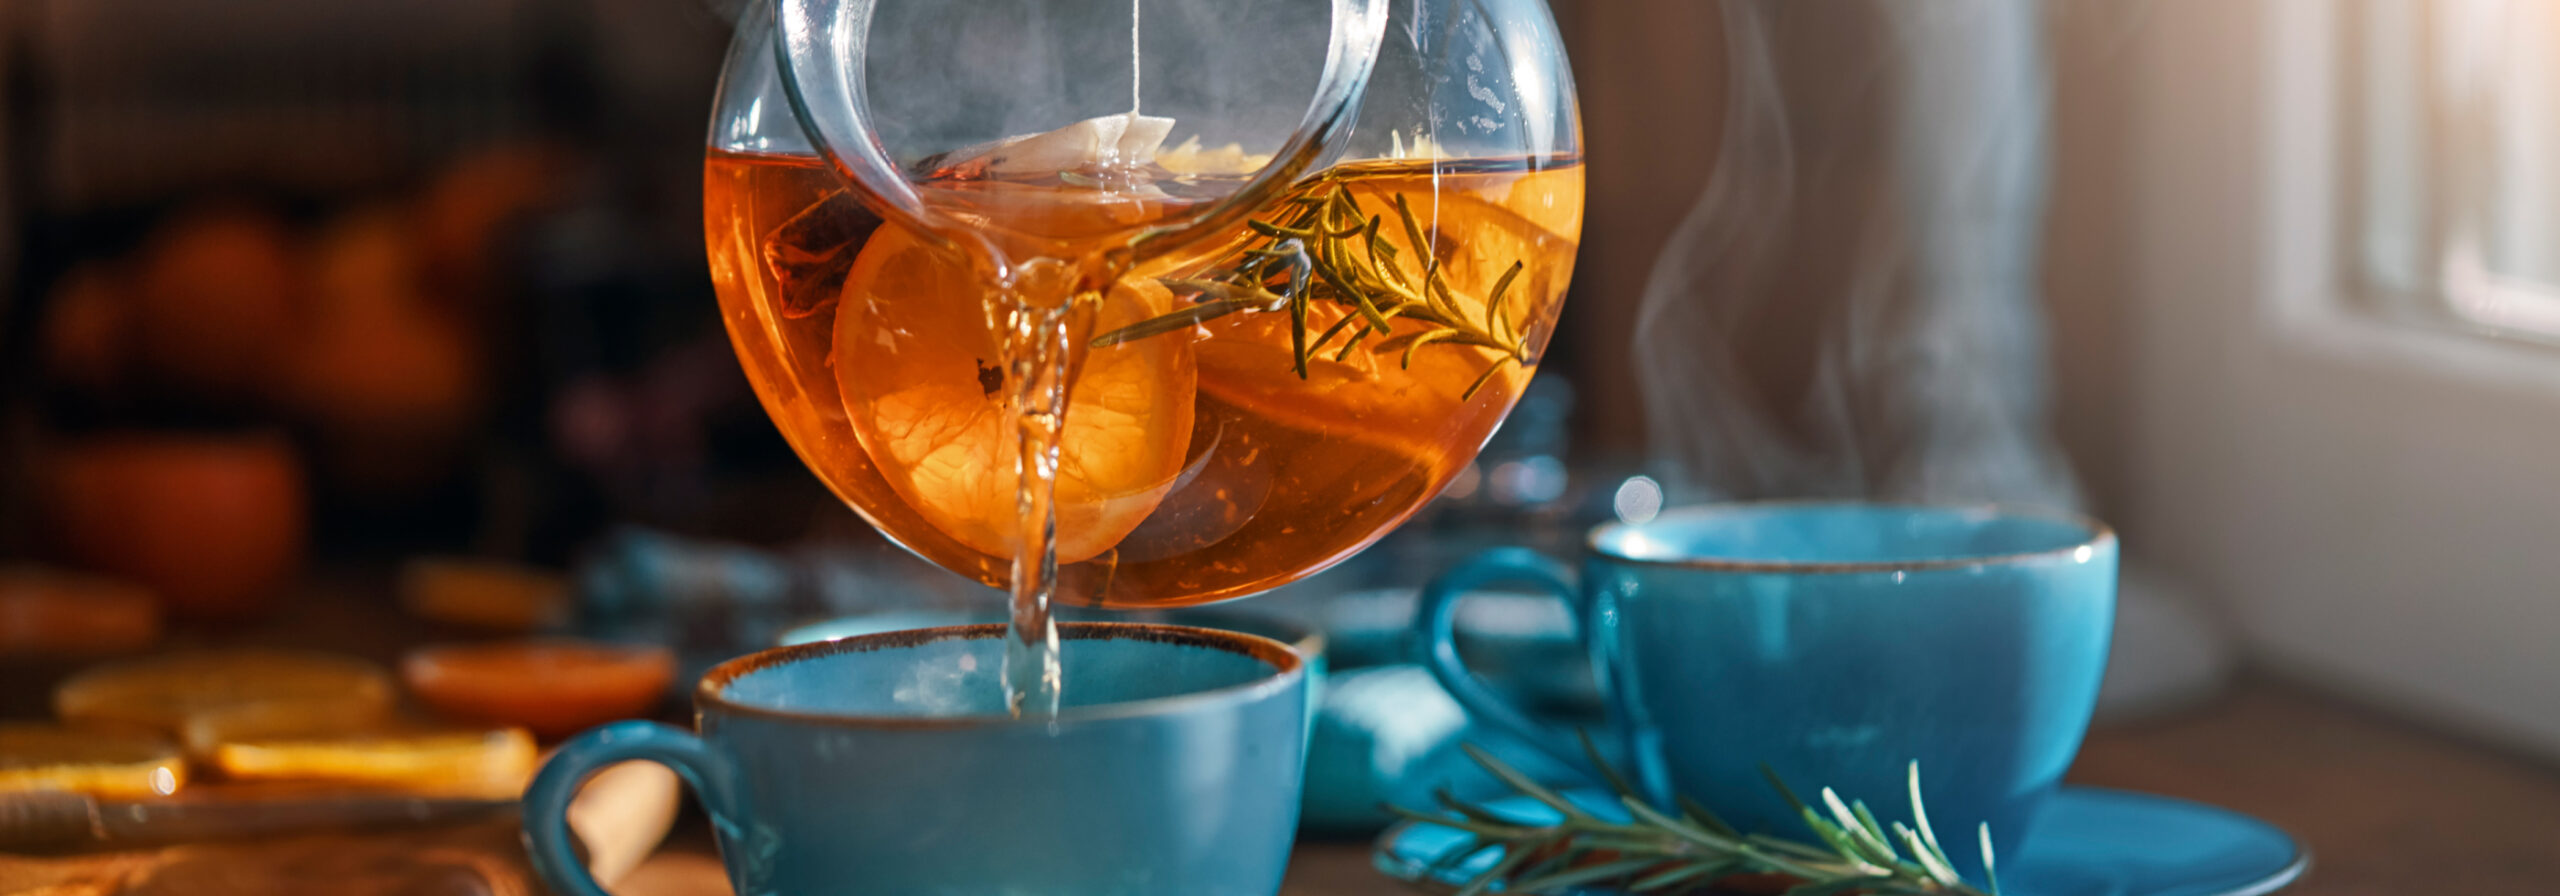 Bailey Brand Consulting - Pot of Twinings Wellness Tea being poured into a blue tea cup on a counter in front of a window